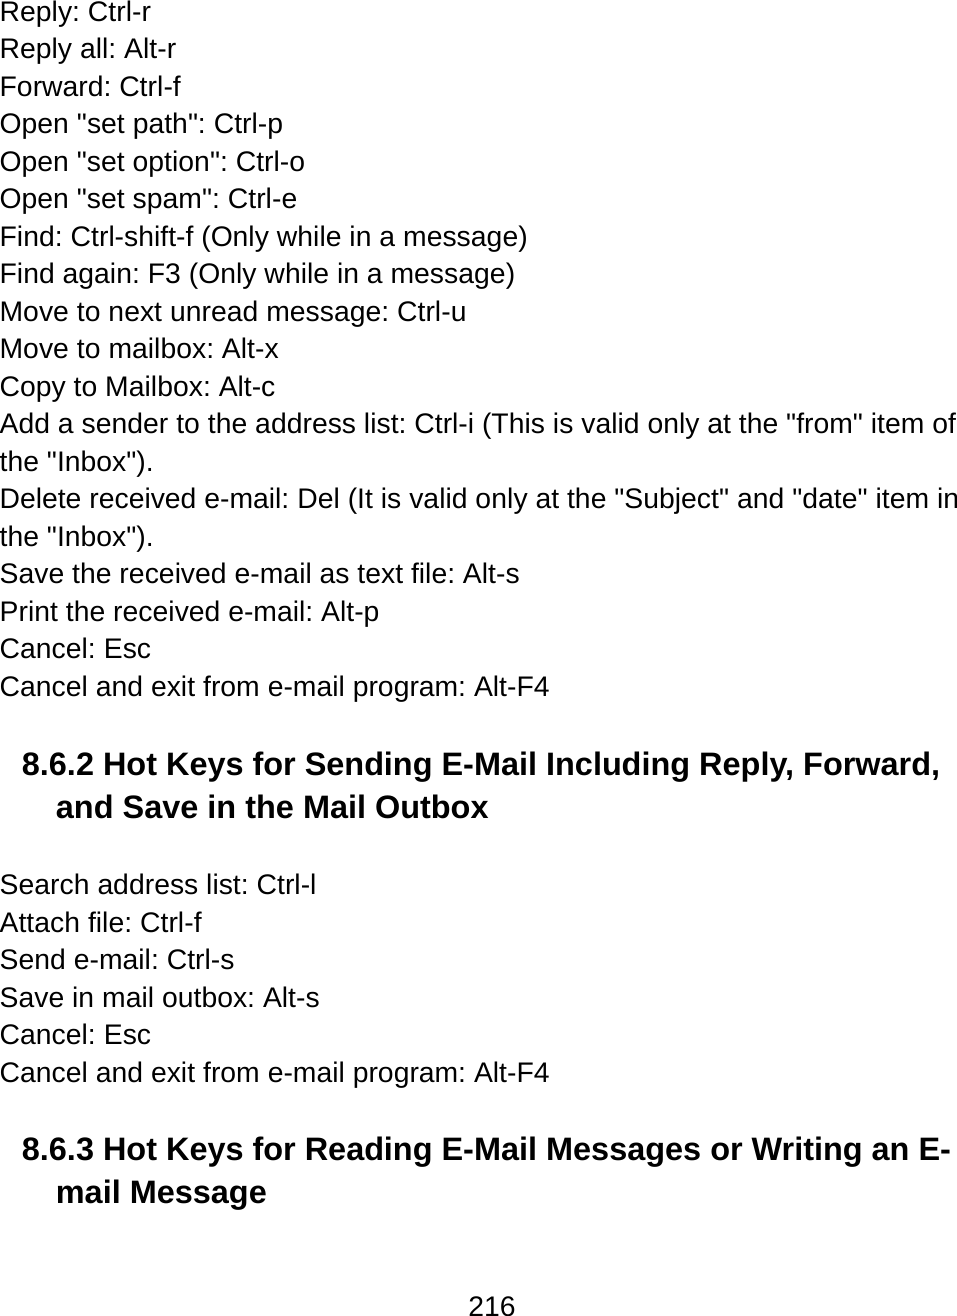 216  Reply: Ctrl-r Reply all: Alt-r Forward: Ctrl-f Open &quot;set path&quot;: Ctrl-p Open &quot;set option&quot;: Ctrl-o  Open &quot;set spam&quot;: Ctrl-e  Find: Ctrl-shift-f (Only while in a message) Find again: F3 (Only while in a message) Move to next unread message: Ctrl-u Move to mailbox: Alt-x Copy to Mailbox: Alt-c Add a sender to the address list: Ctrl-i (This is valid only at the &quot;from&quot; item of the &quot;Inbox&quot;). Delete received e-mail: Del (It is valid only at the &quot;Subject&quot; and &quot;date&quot; item in the &quot;Inbox&quot;). Save the received e-mail as text file: Alt-s Print the received e-mail: Alt-p Cancel: Esc Cancel and exit from e-mail program: Alt-F4  8.6.2 Hot Keys for Sending E-Mail Including Reply, Forward, and Save in the Mail Outbox  Search address list: Ctrl-l Attach file: Ctrl-f  Send e-mail: Ctrl-s Save in mail outbox: Alt-s Cancel: Esc Cancel and exit from e-mail program: Alt-F4  8.6.3 Hot Keys for Reading E-Mail Messages or Writing an E-mail Message  